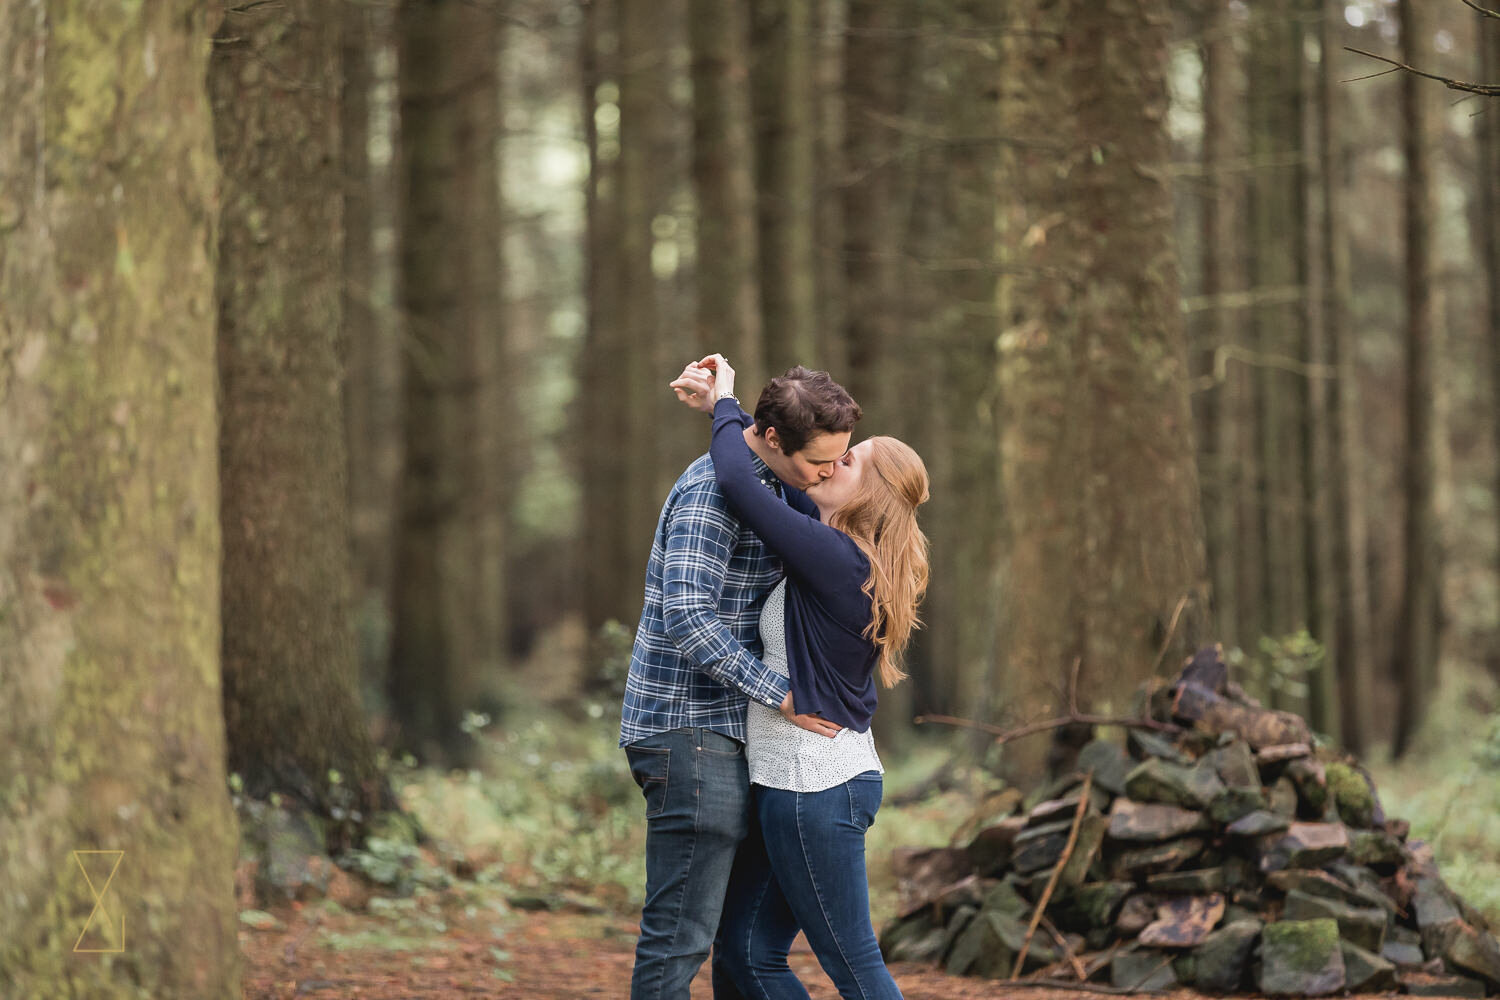 Cheshire-pre-wedding-photoshoot-in-the-forest-011.jpg